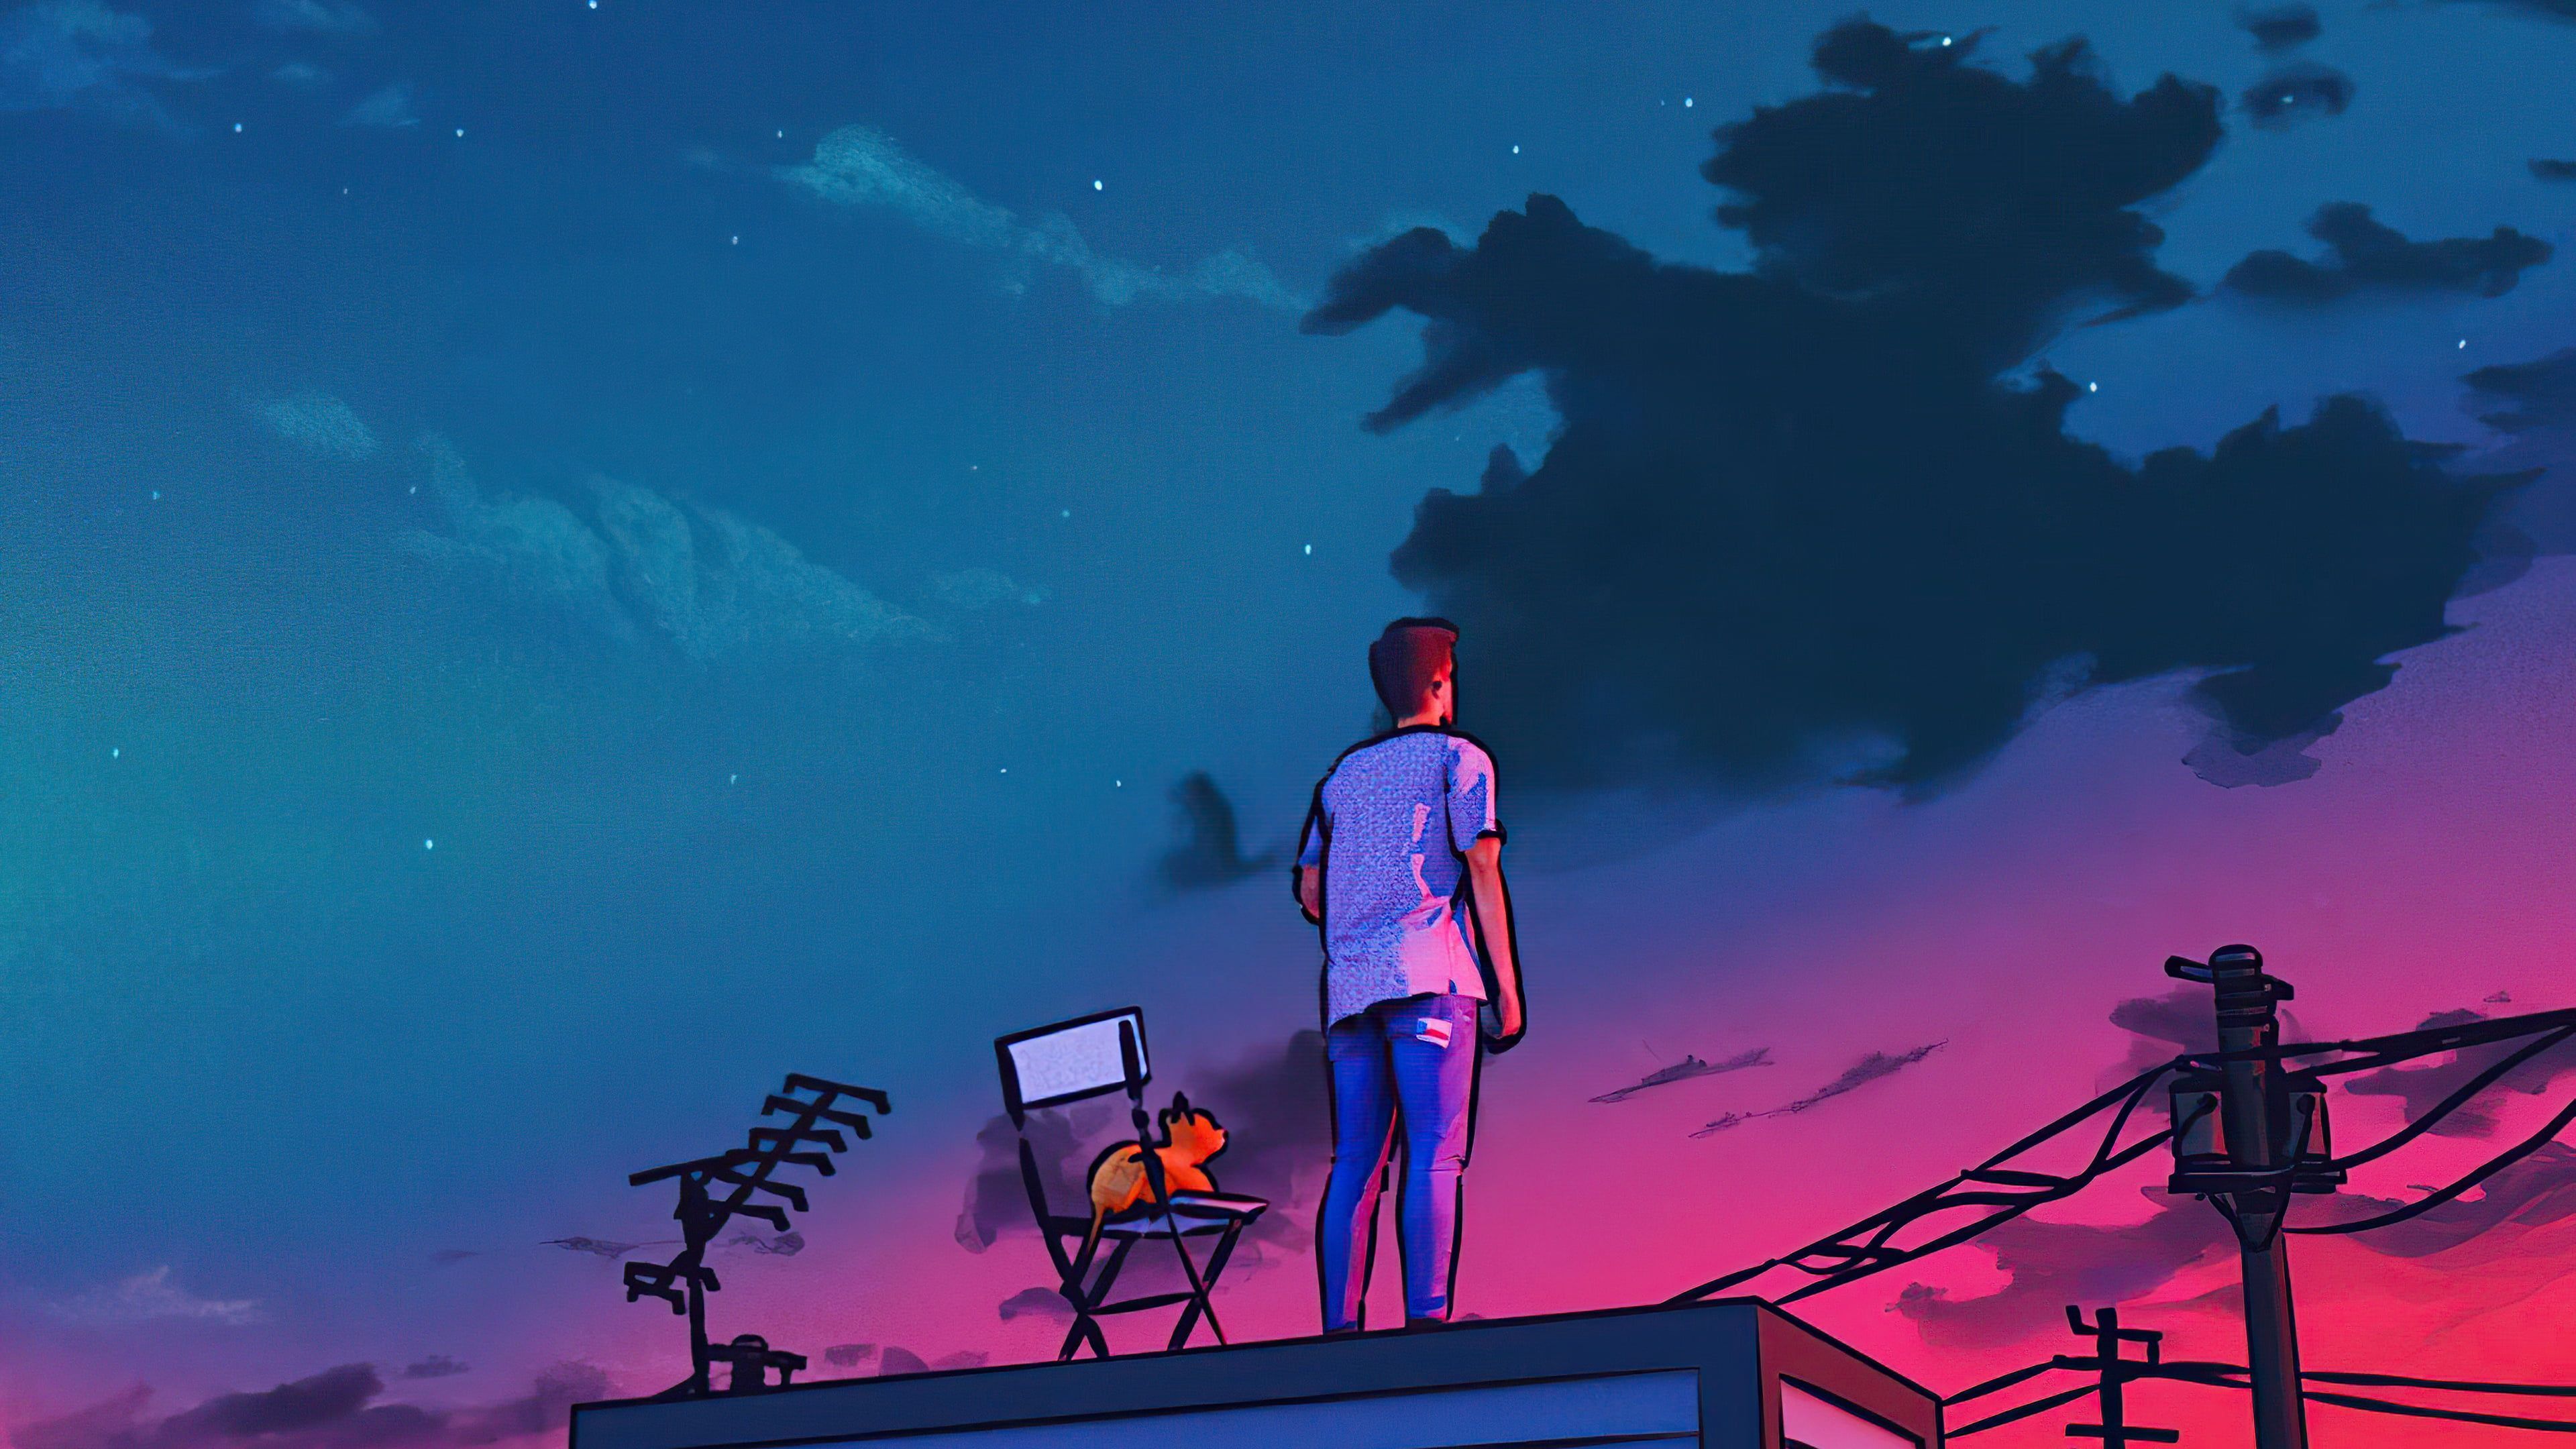 A person standing on a roof with a cat and looking at the sky - Lo fi